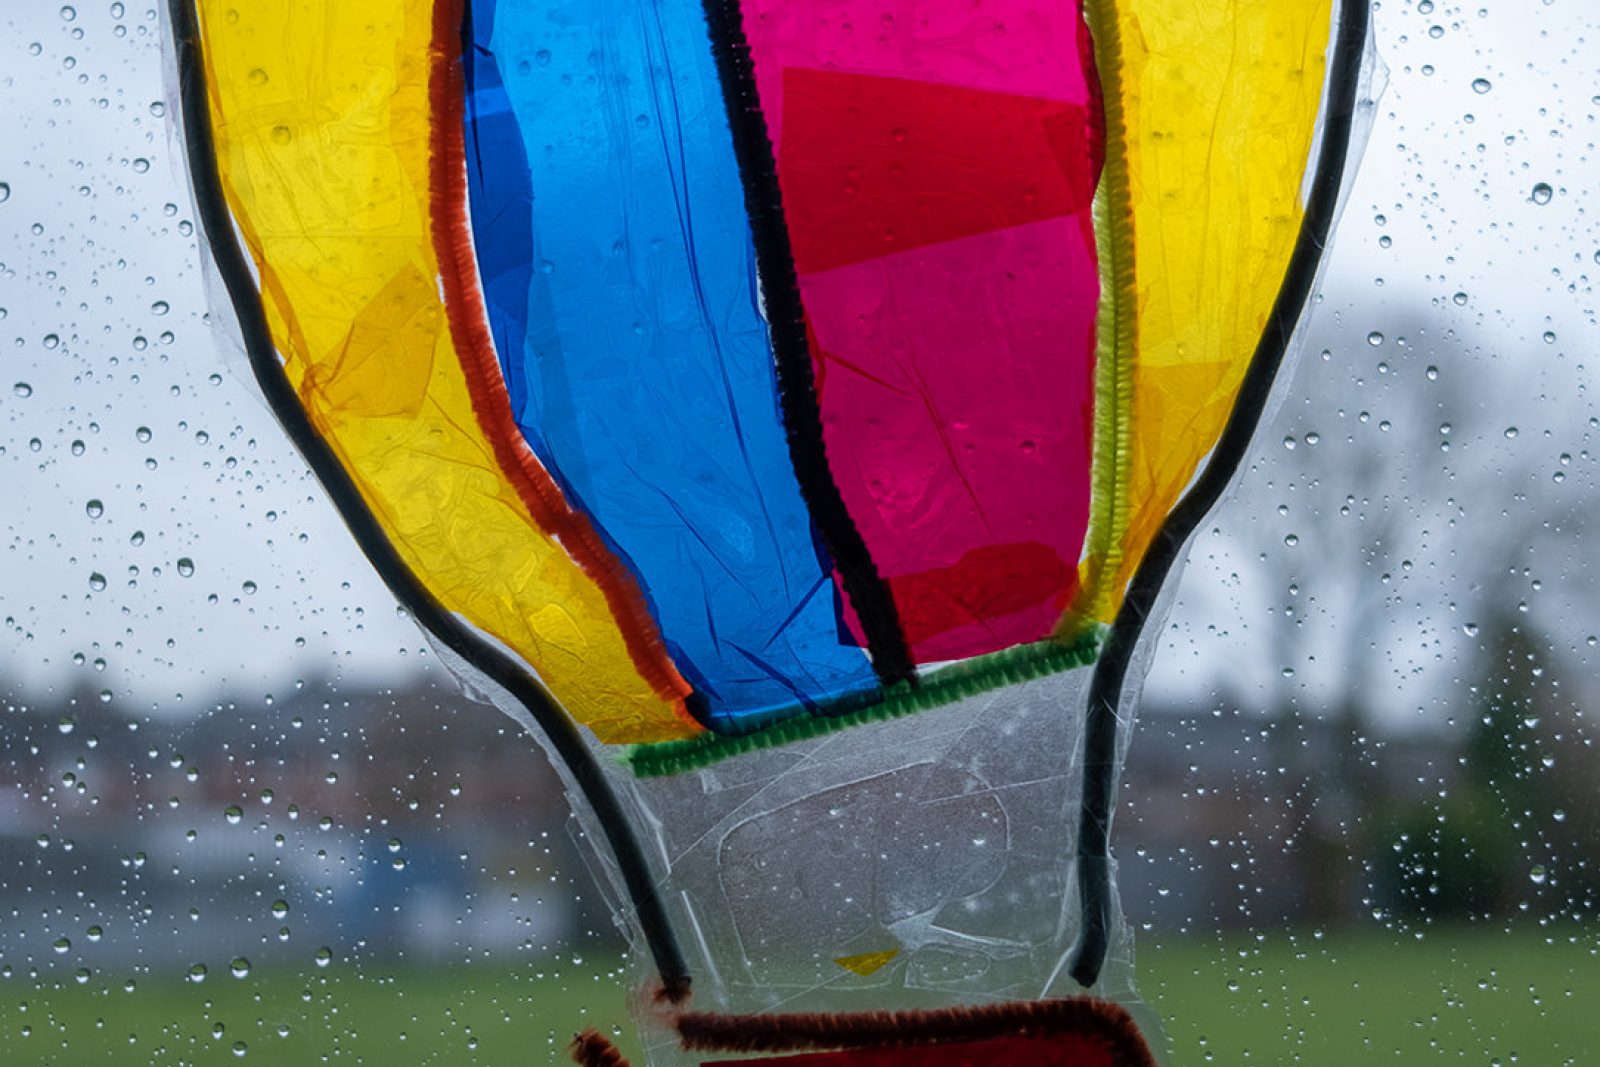 A colourful cut out of a hot air balloon made of clear plastic is stuck to a window letting the light shine through it. The bright colours contract against a grey and rainy day outside the window.